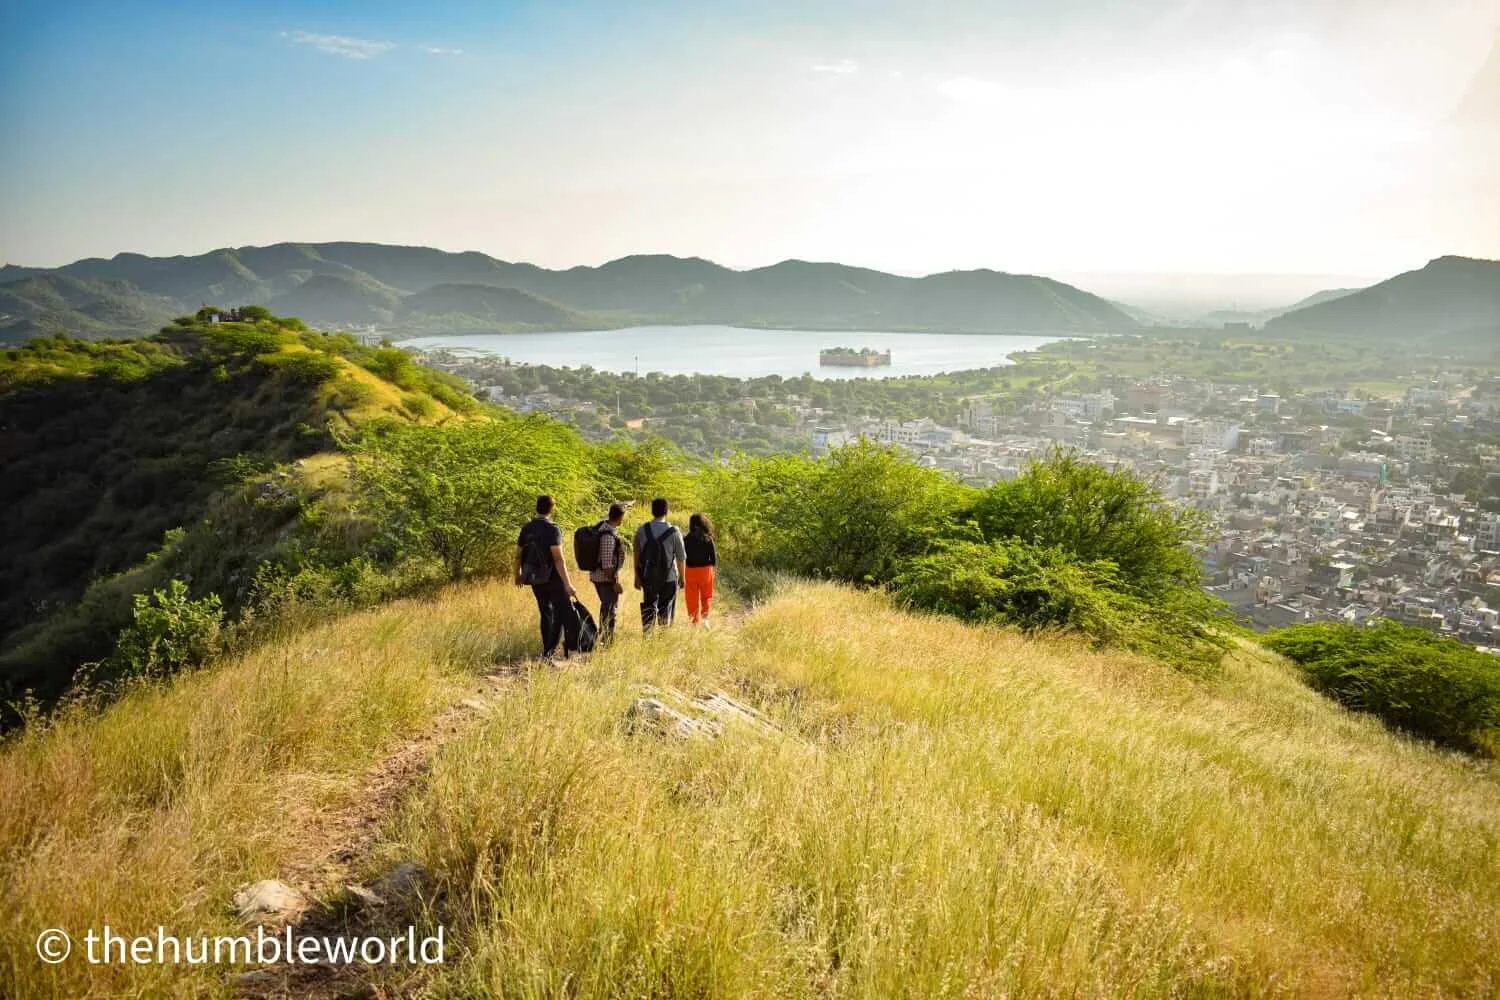 Incredible View of Jal Mahal and Jaipur City from the Trek View Point